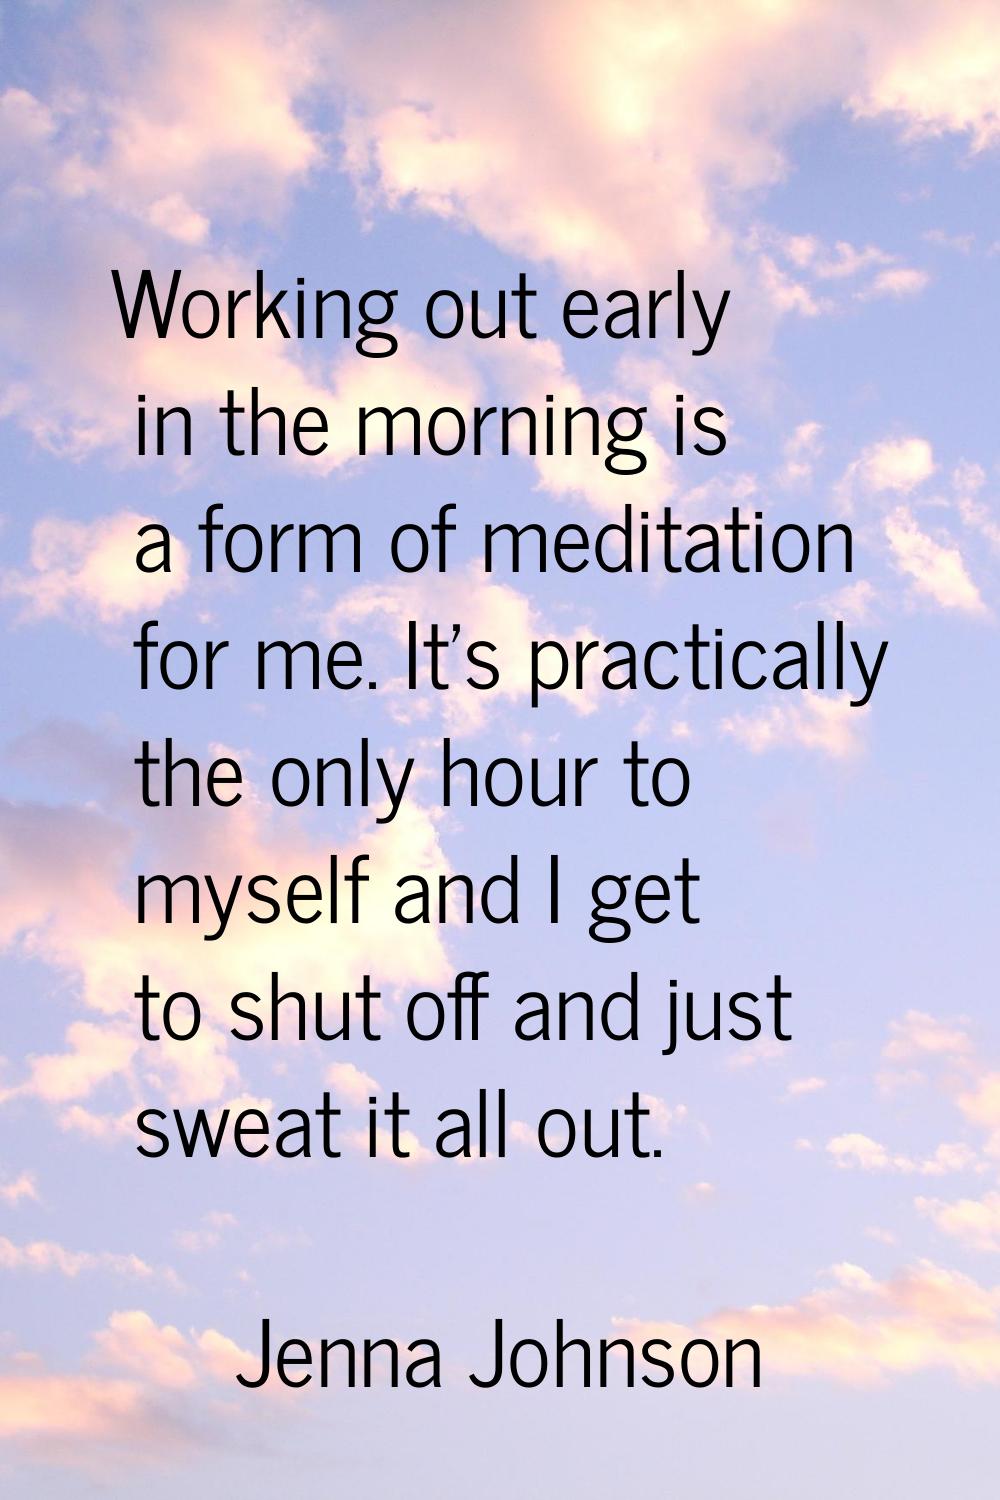 Working out early in the morning is a form of meditation for me. It's practically the only hour to 